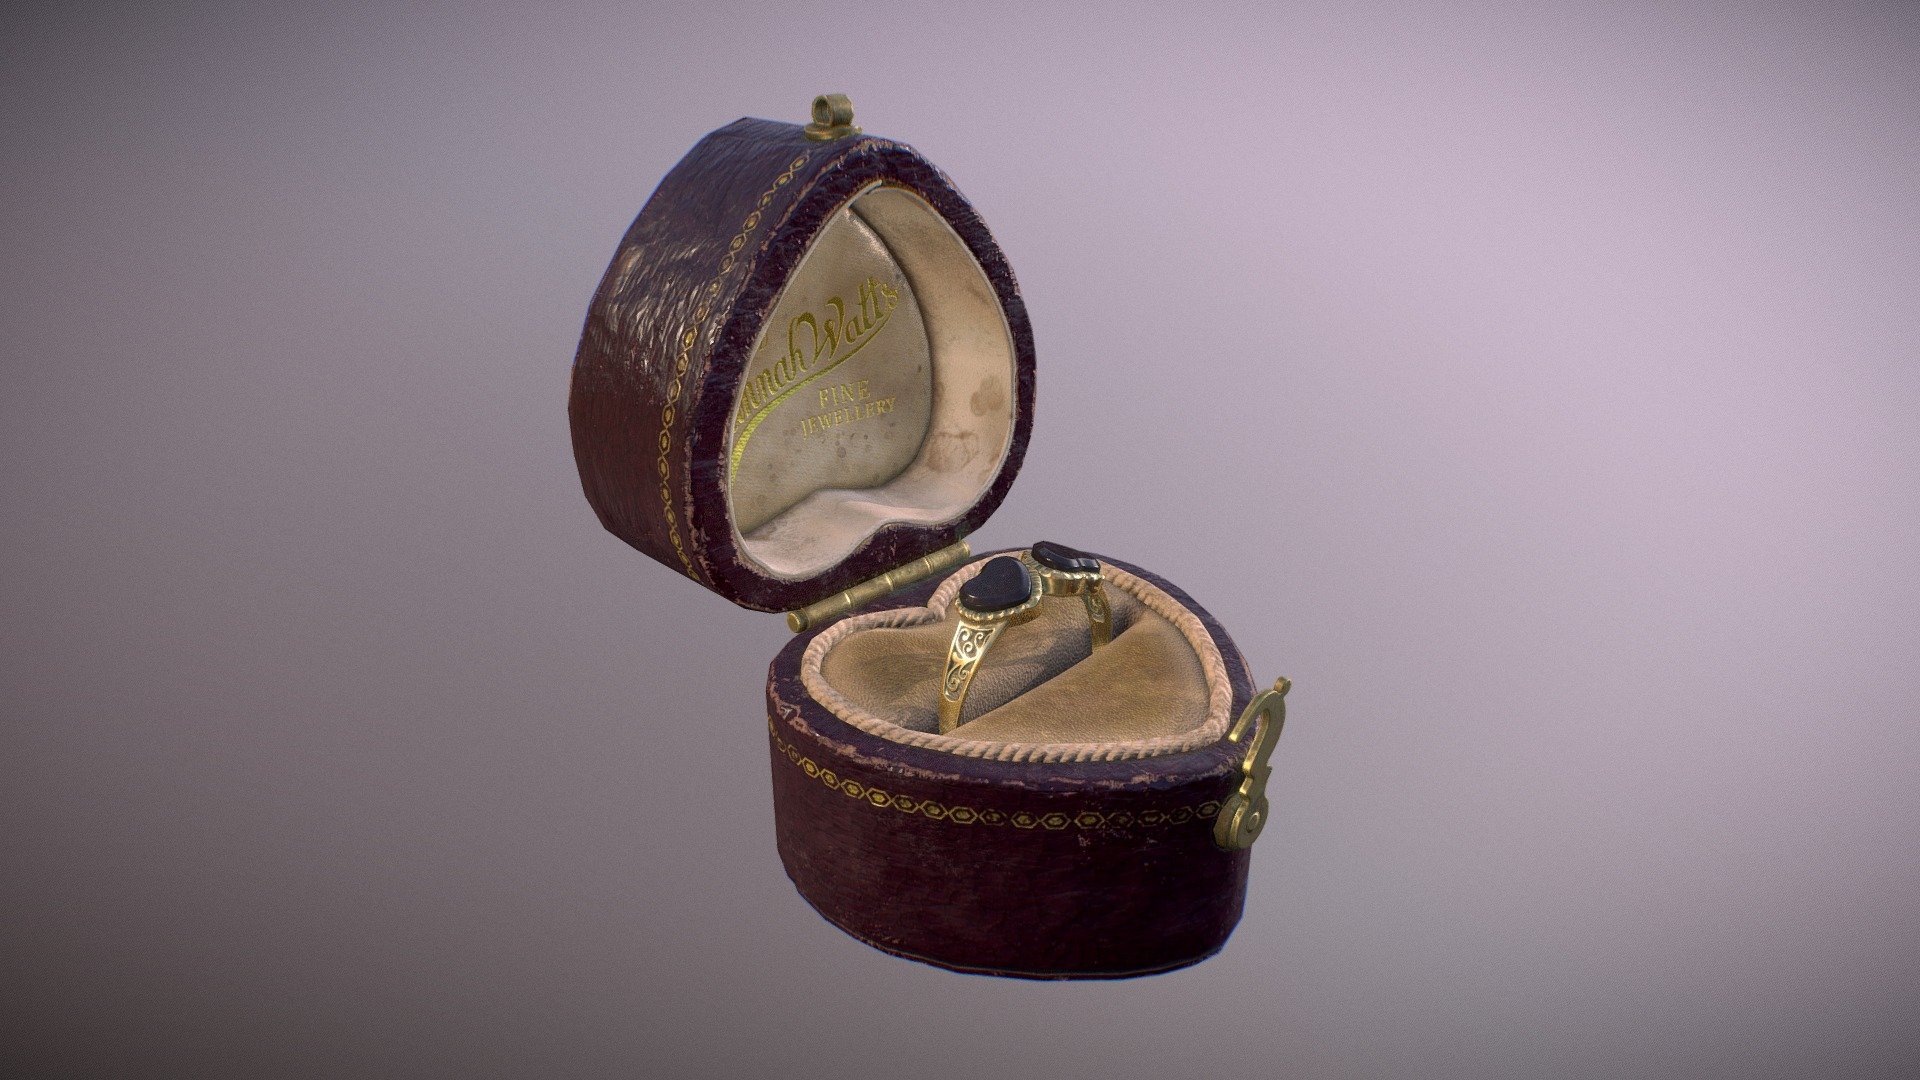 An old, antique ring box - based on existing ones from the 19th century. Complete with a black onyx ring and my own personal, branded touch 3d model